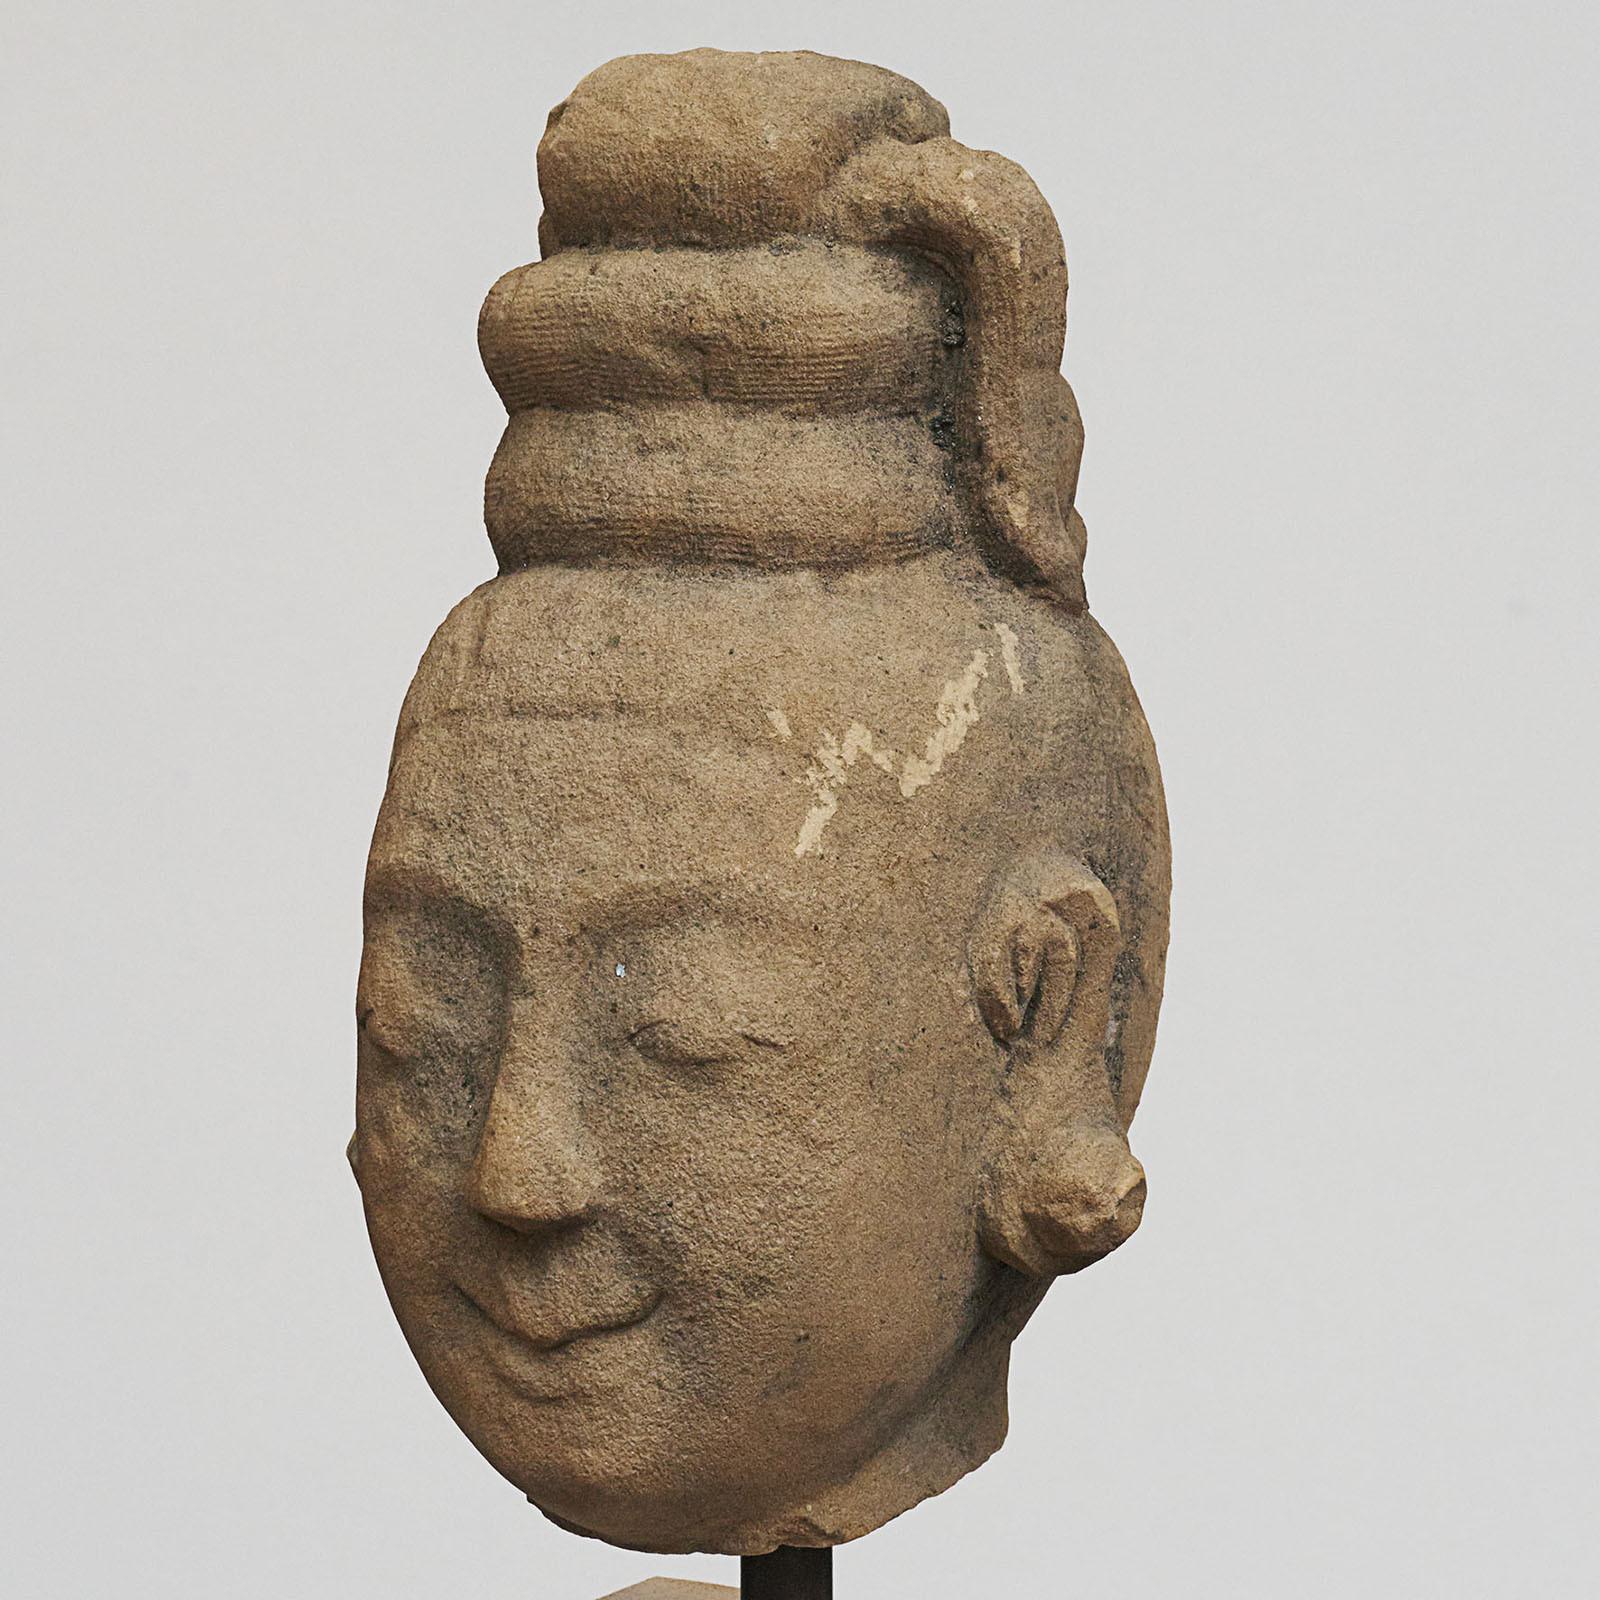 17th-18th century woman's head, carved in sandstone. From pagoda / temple in Burma. Mounted on a light sandstone base. Charming, untouched with good charisma.